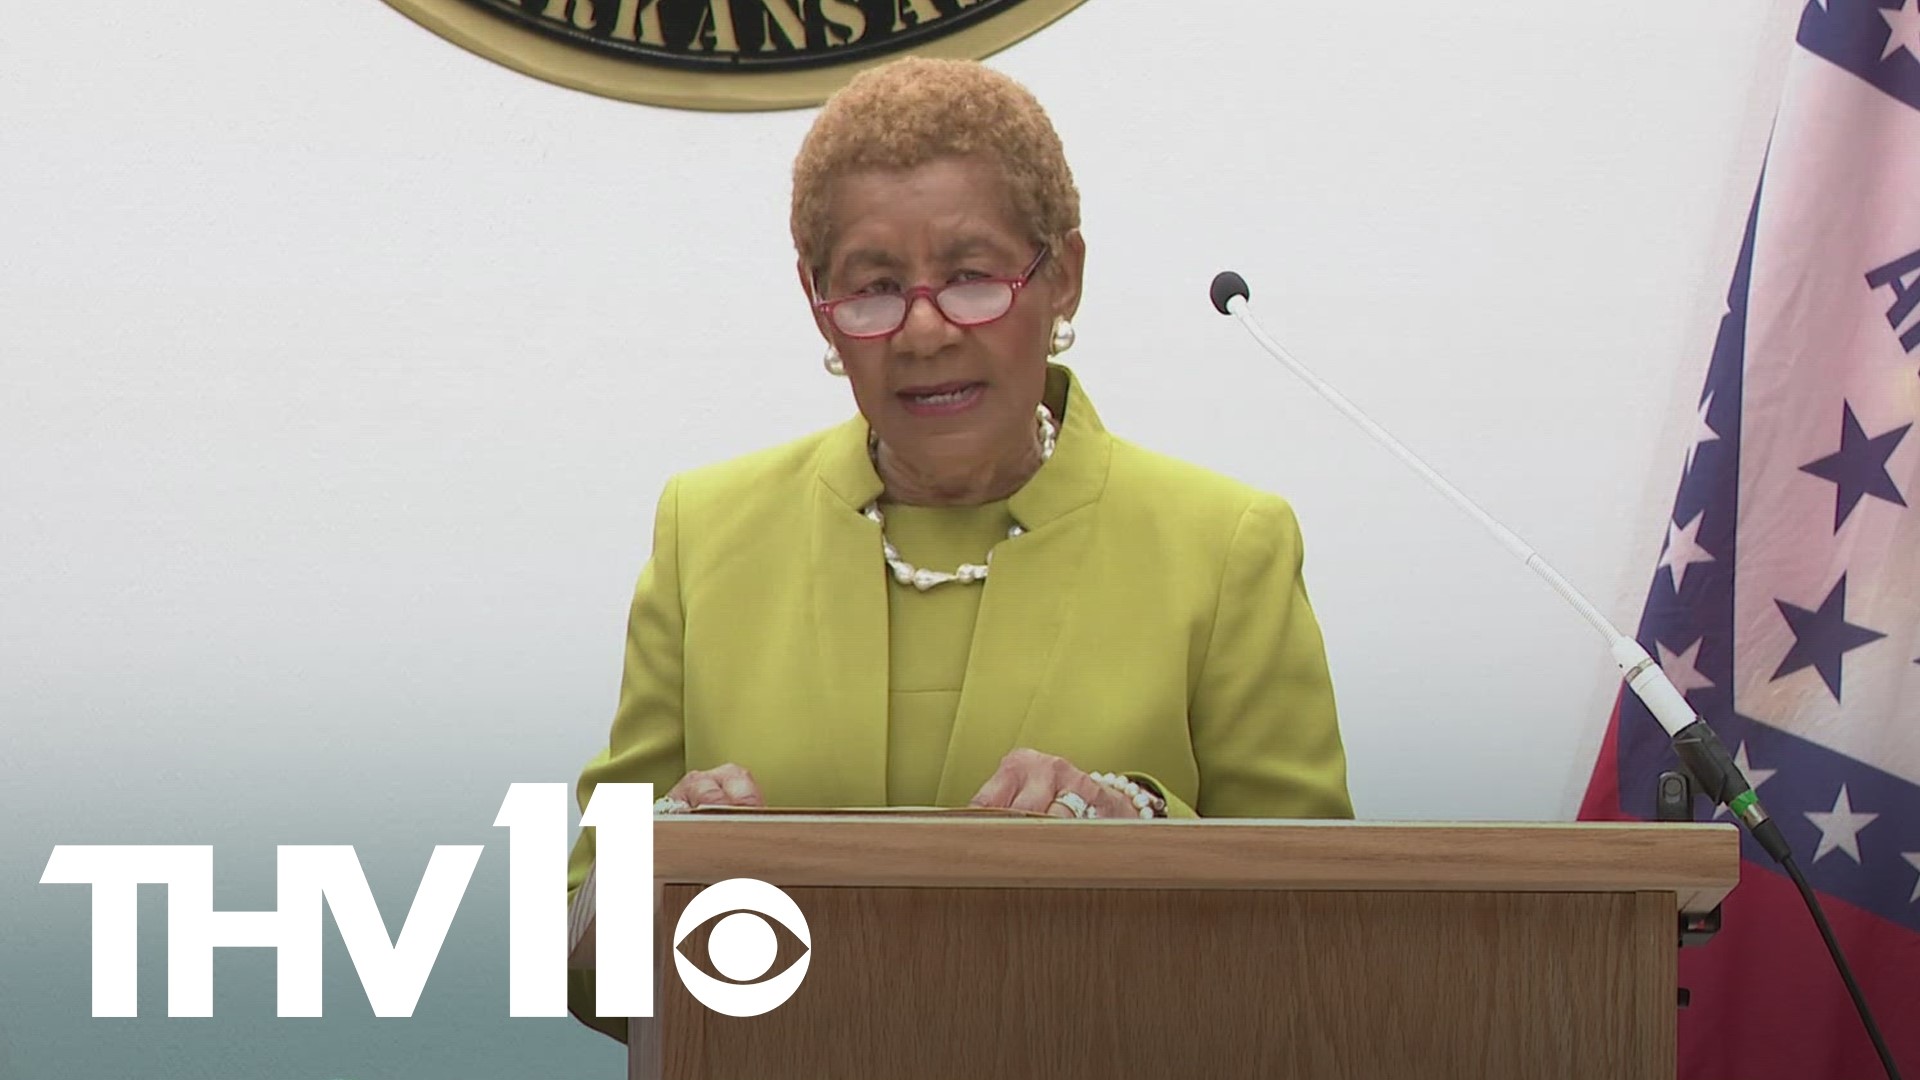 Pine Bluff Mayor Shirley Washington delivered the annual State of the City address and touched on the importance of reducing crime and increasing public safety.